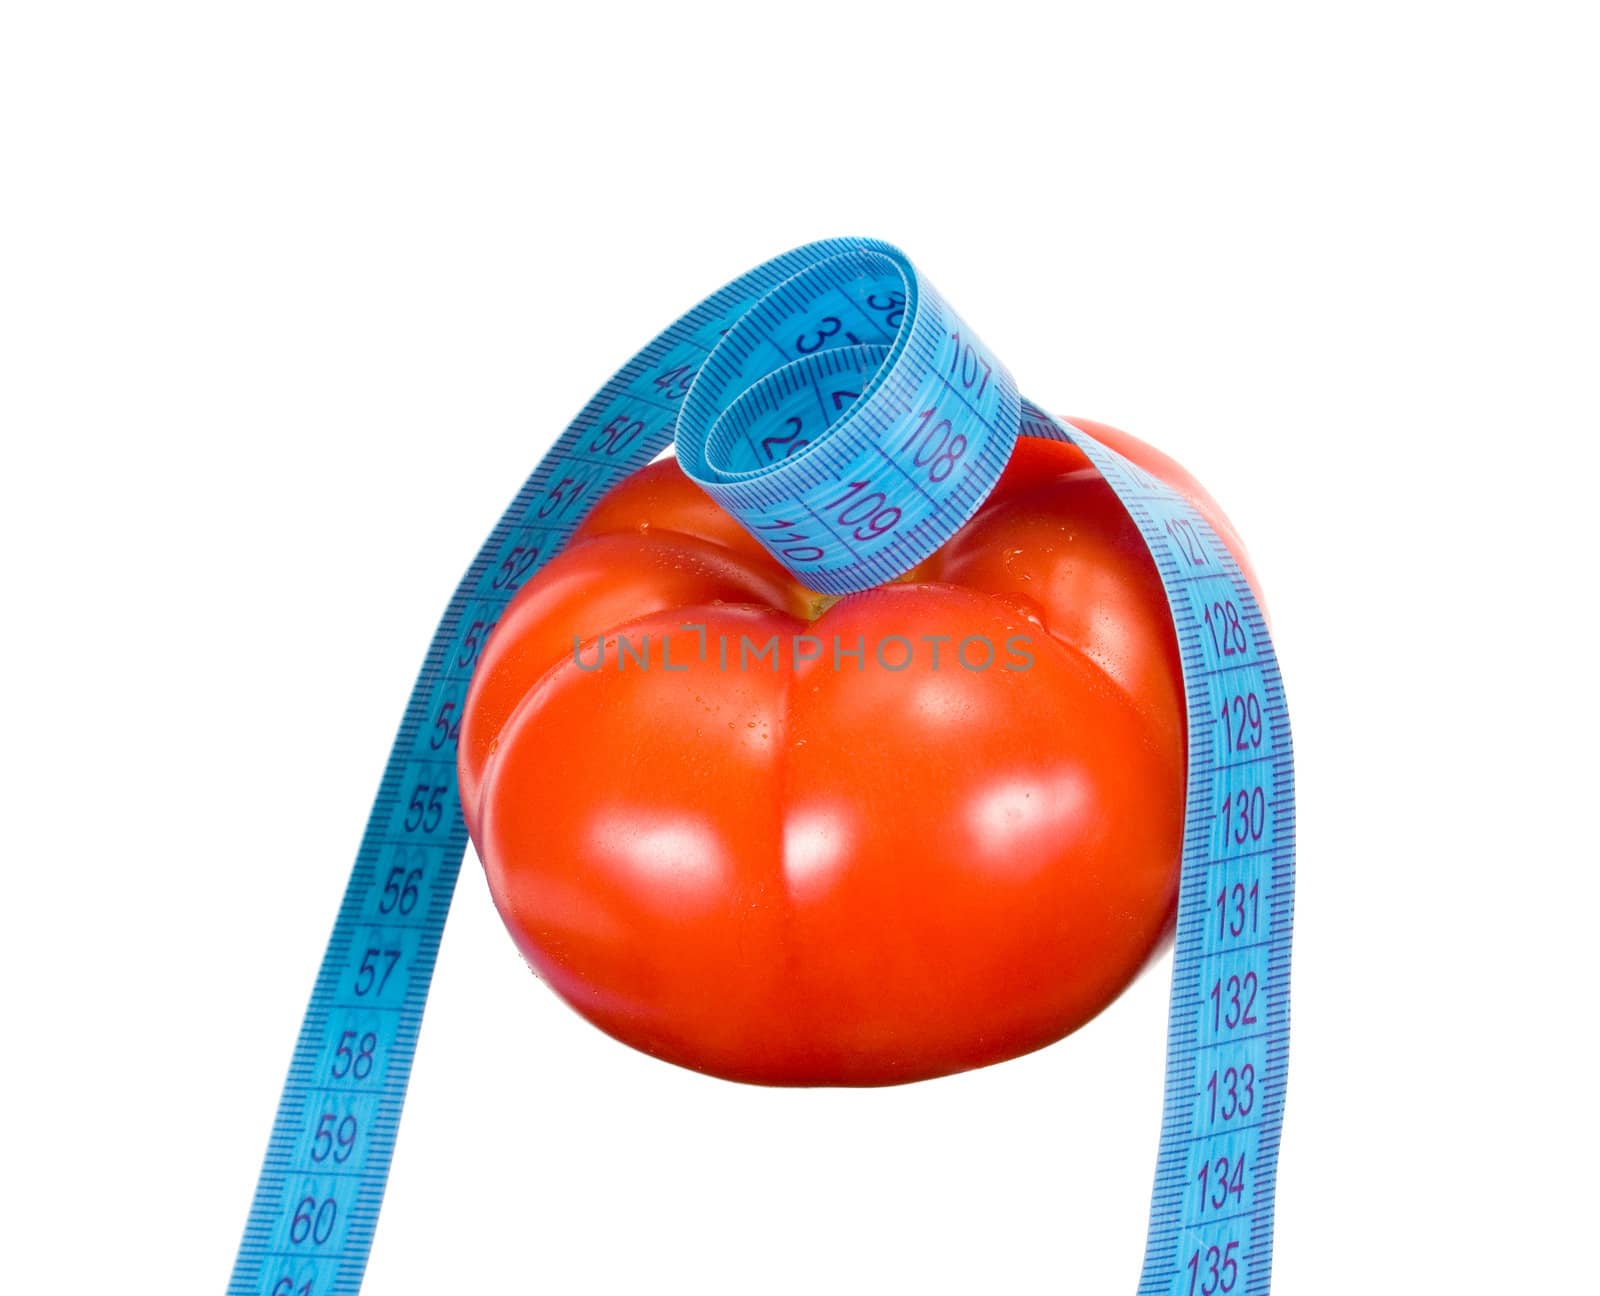 tomato and tape measure by uriy2007